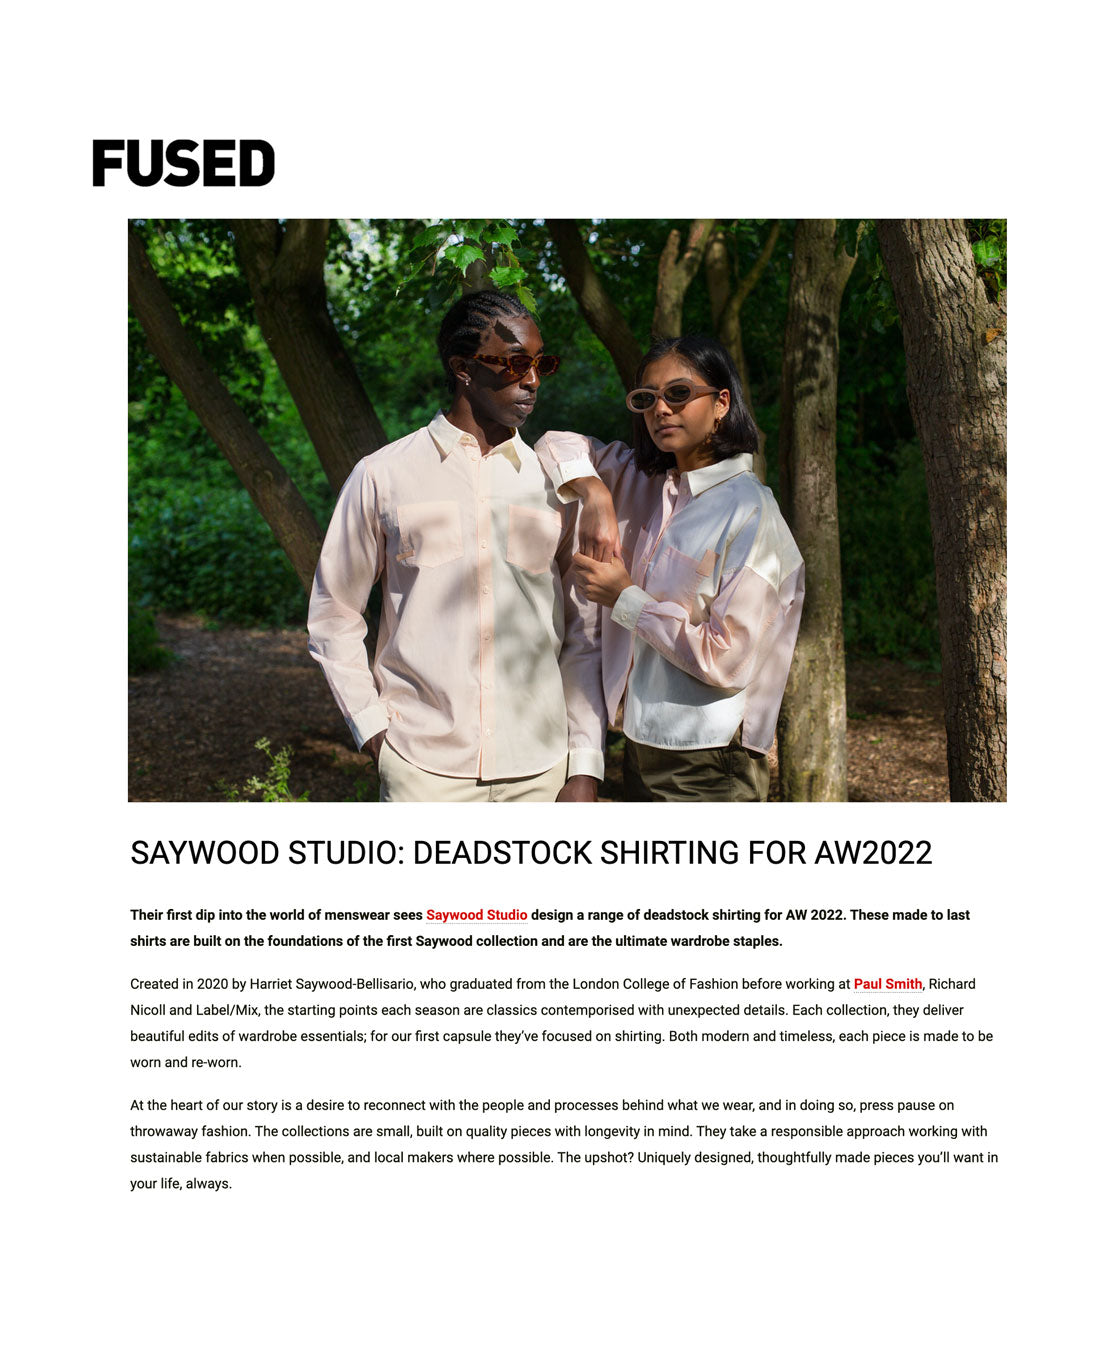 Fused feature page on Saywood, title reads: SAYWOOD STUDIO: DEADSTOCK SHIRTING FOR AW2022